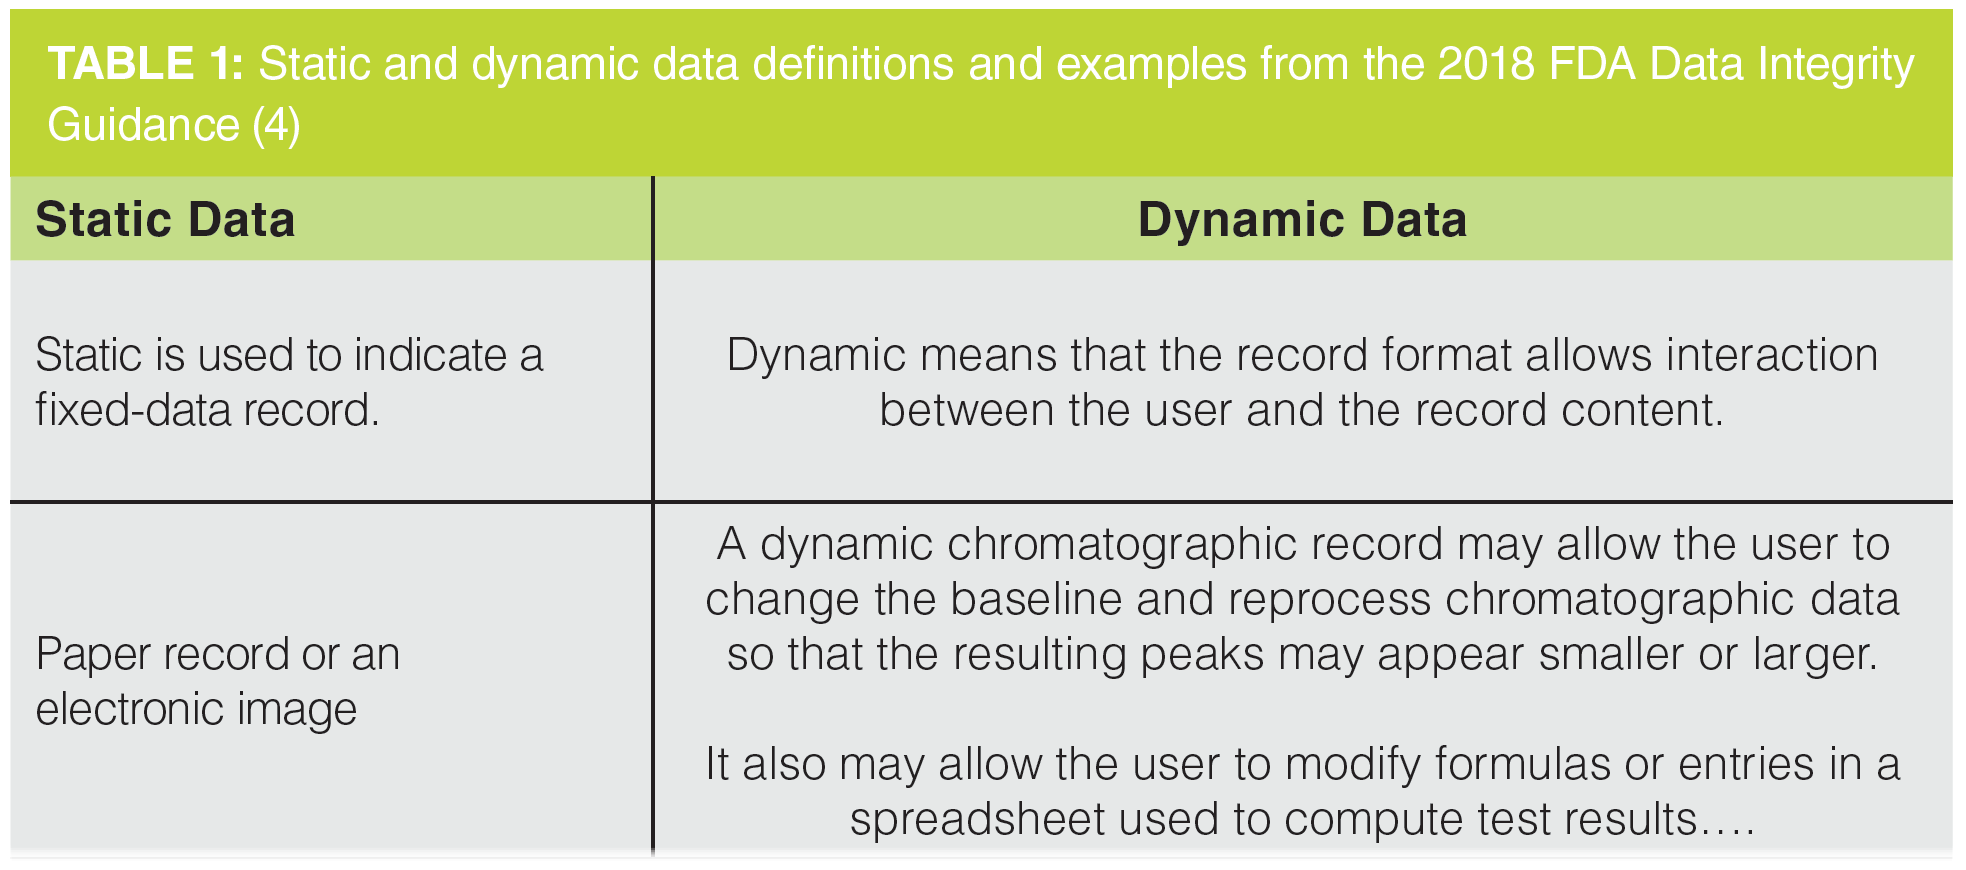 Is data static or dynamic?